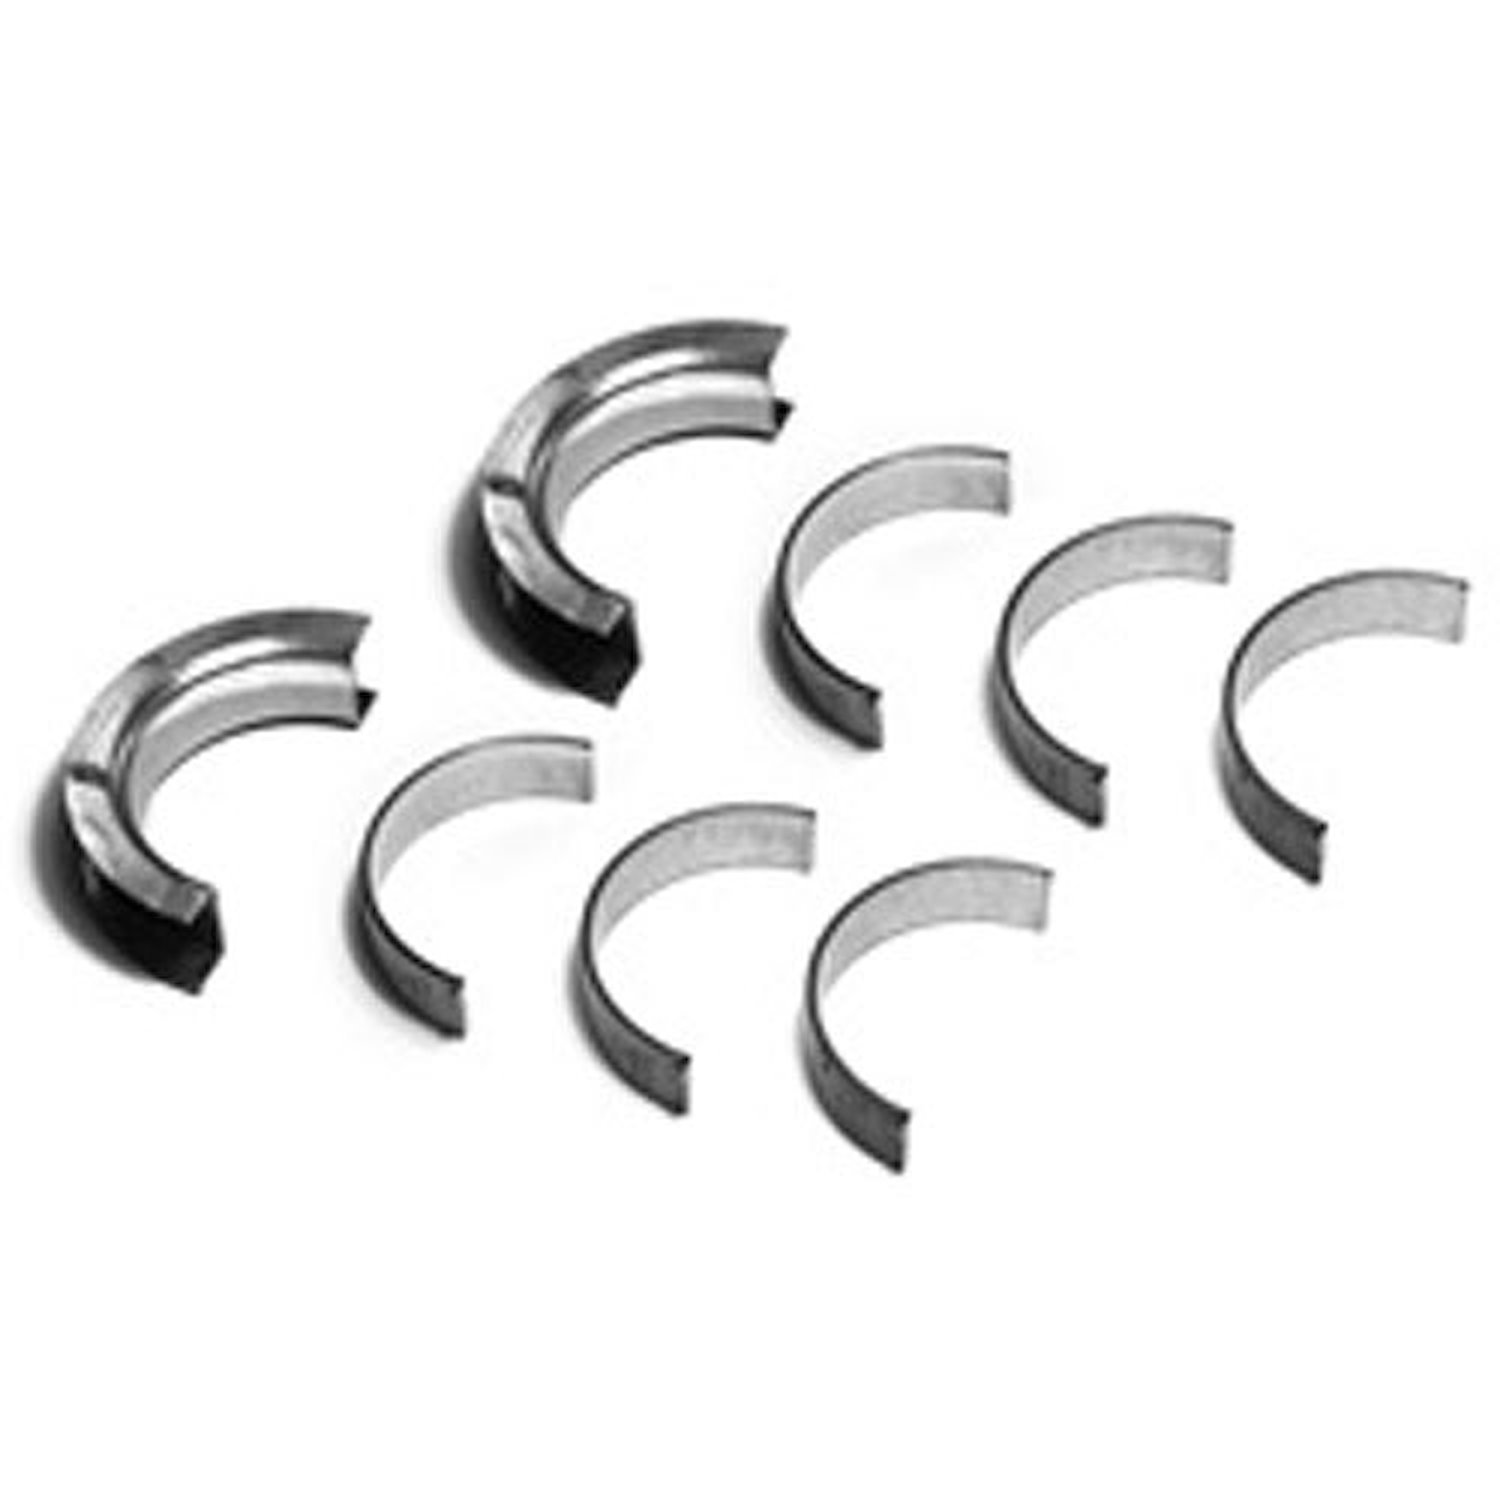 This standard size main bearing set from Omix-ADA fits the 3.8L engine used in 2007-2011 Jeep Wranglers.